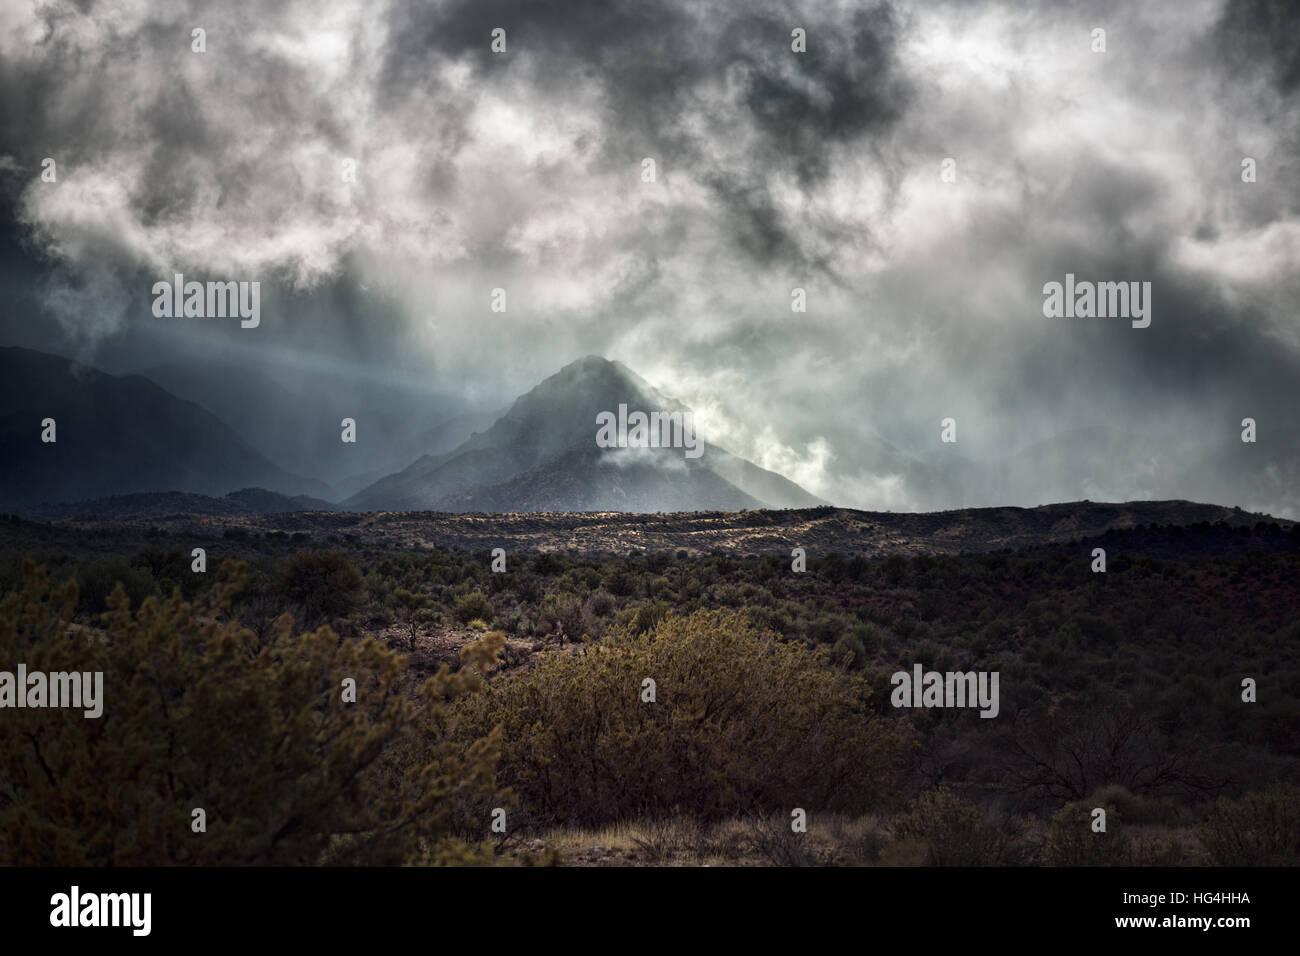 Dramatic clouds, fog, and mist along the boundary of the rain shadow effect behind the Mazatzal Mountain peaks in Arizona Stock Photo